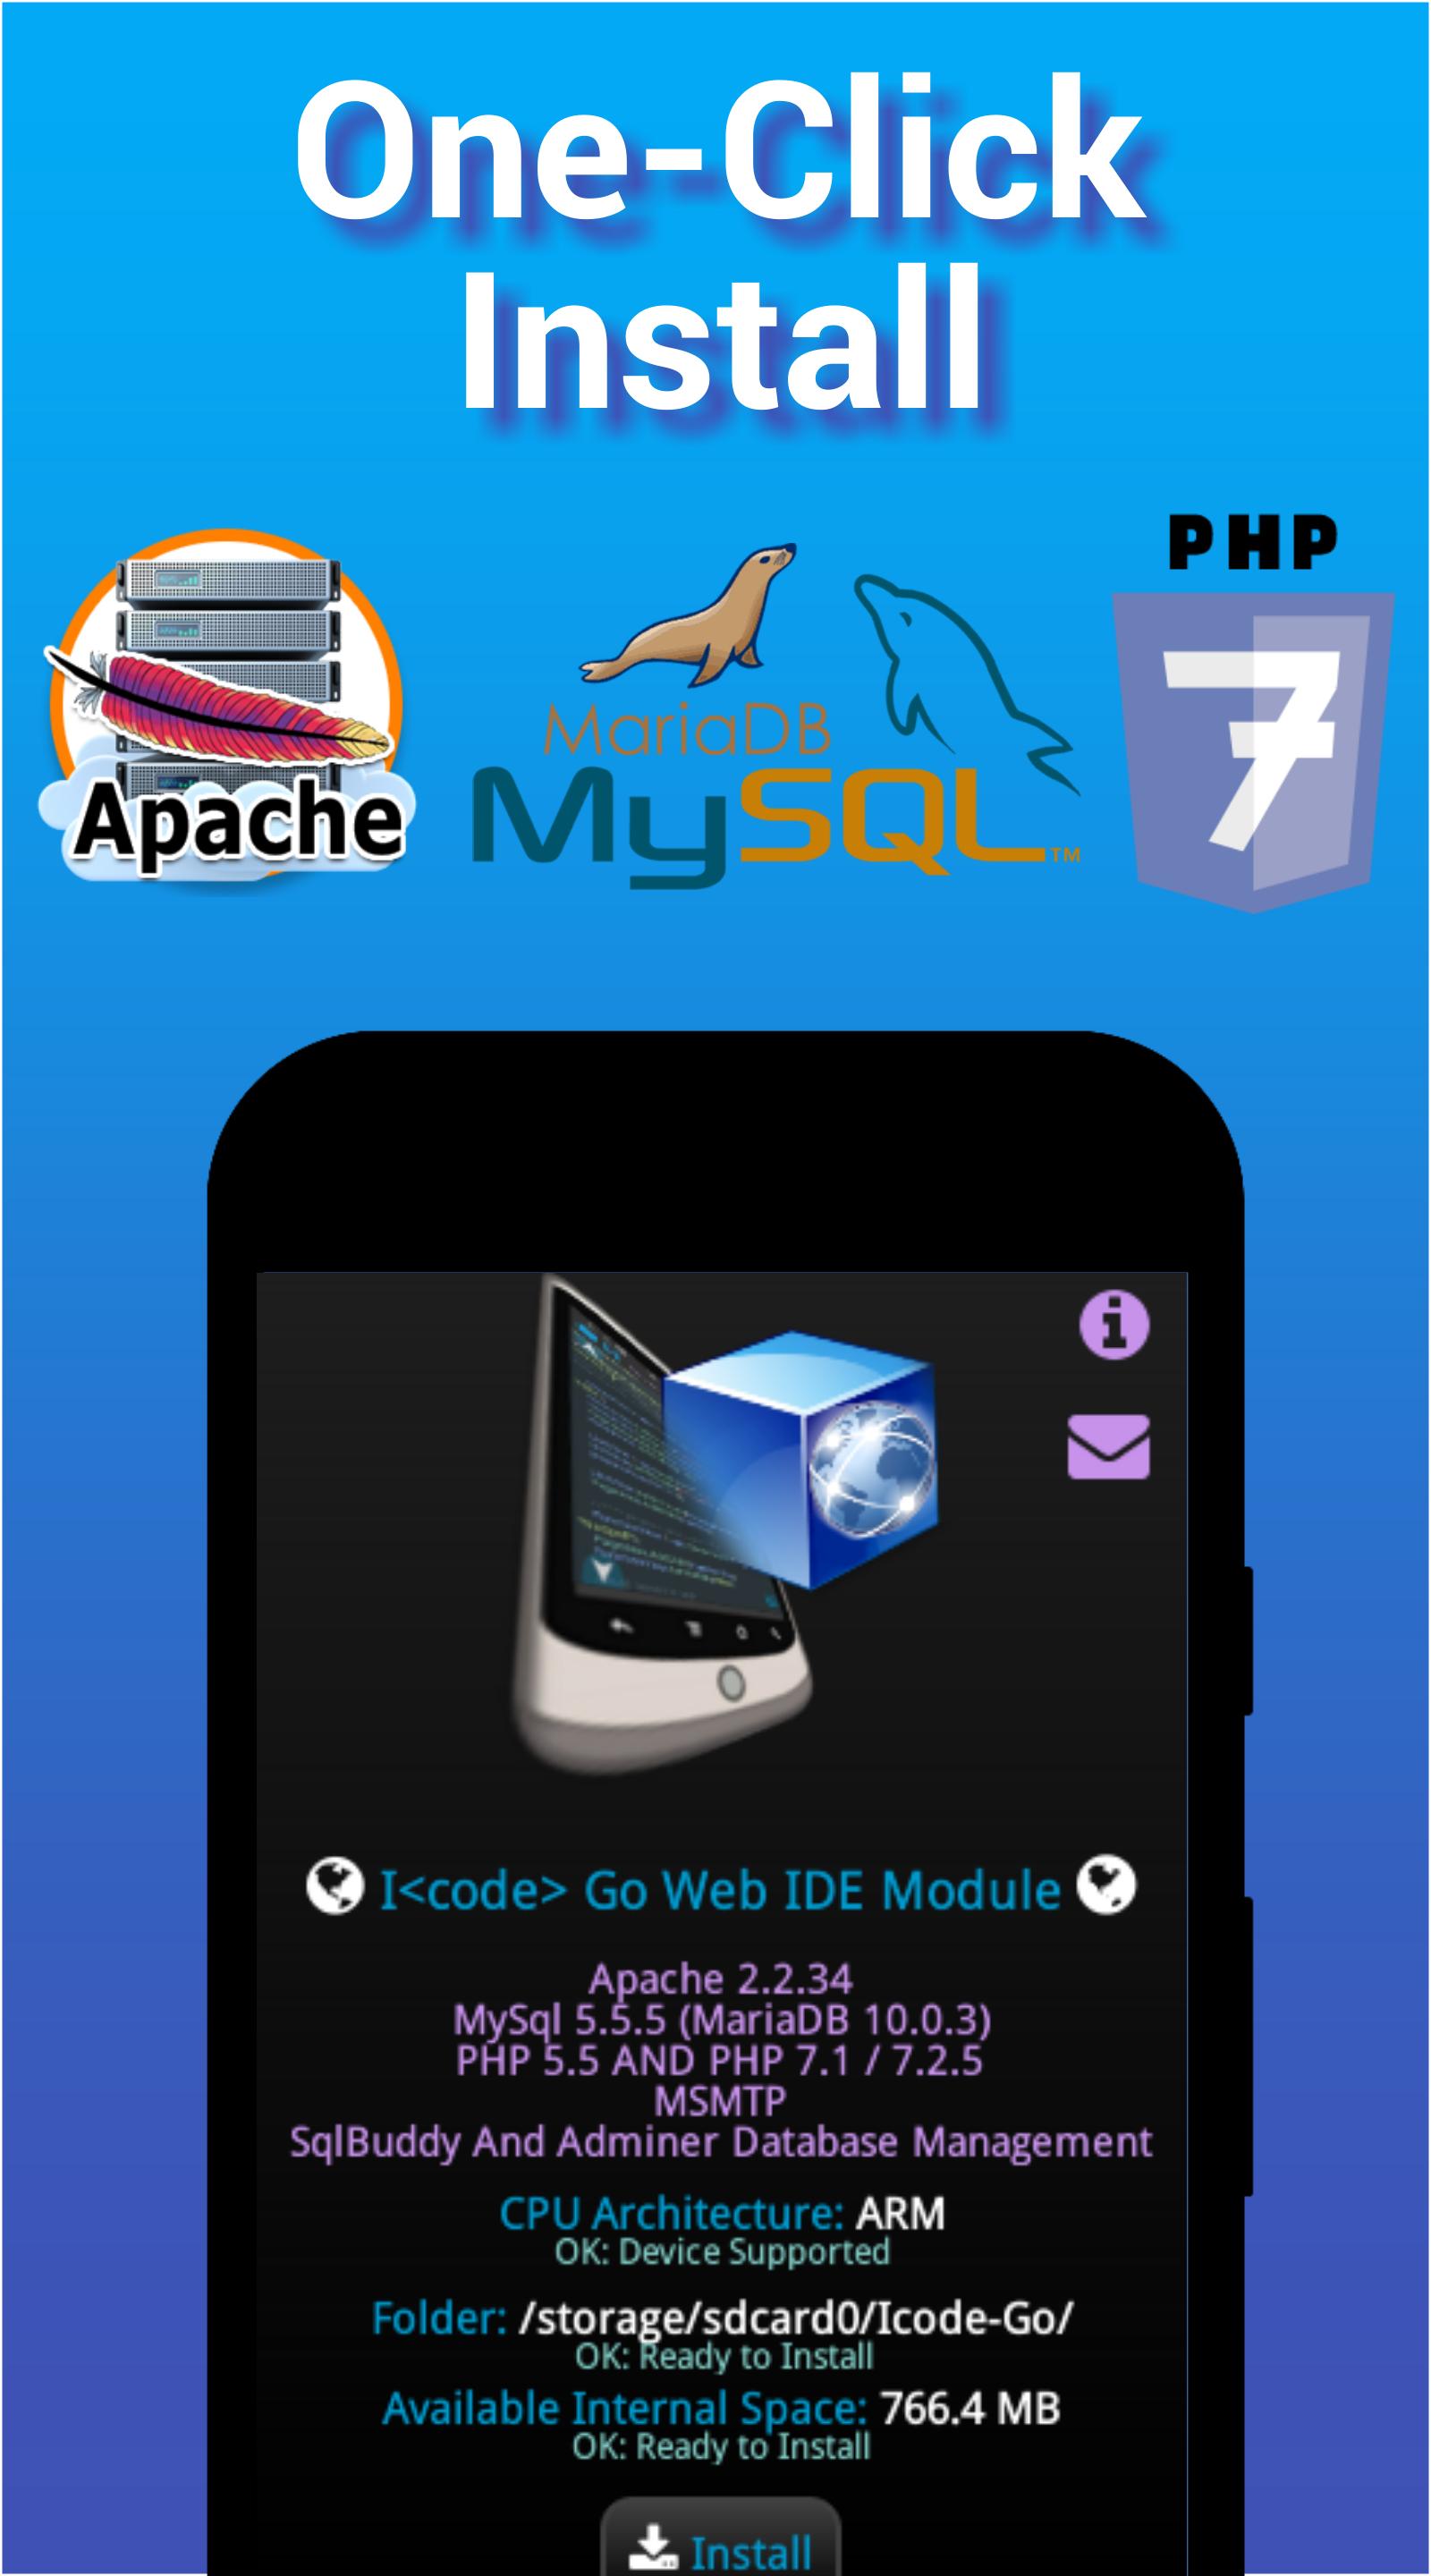 I<code> Web Server - Apache HTTP MySql PHP 7.3 for Android - APK Download